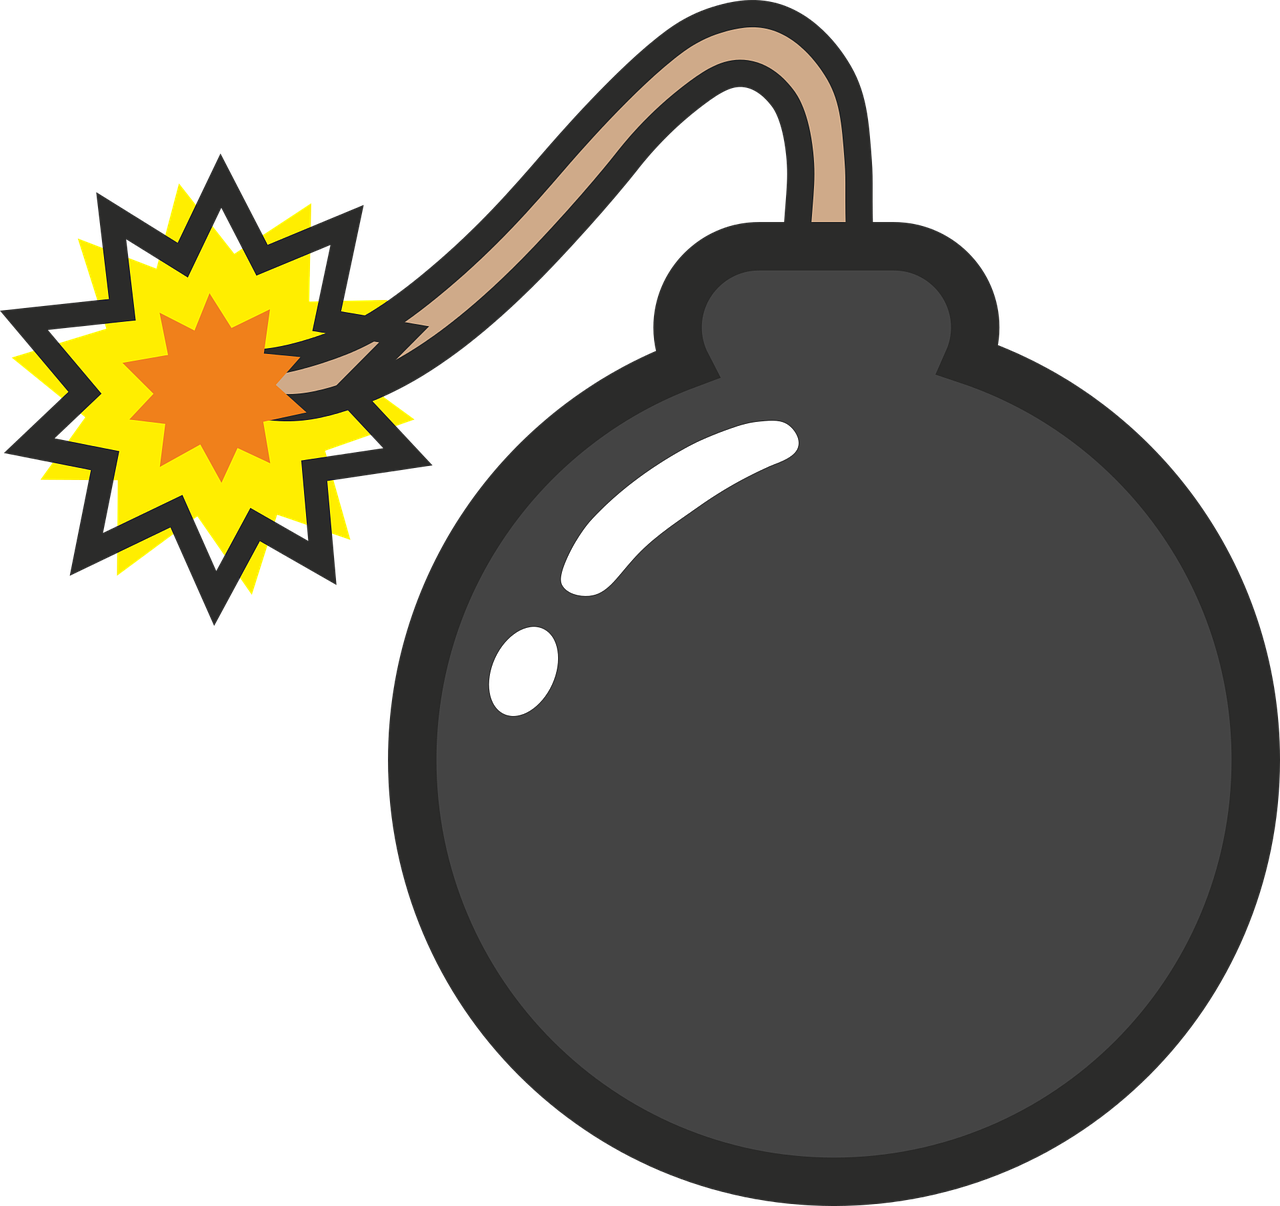 a bomb with a firework coming out of it, inspired by Irvin Bomb, simple cartoon style, black mesa, clash of clans style, flash image